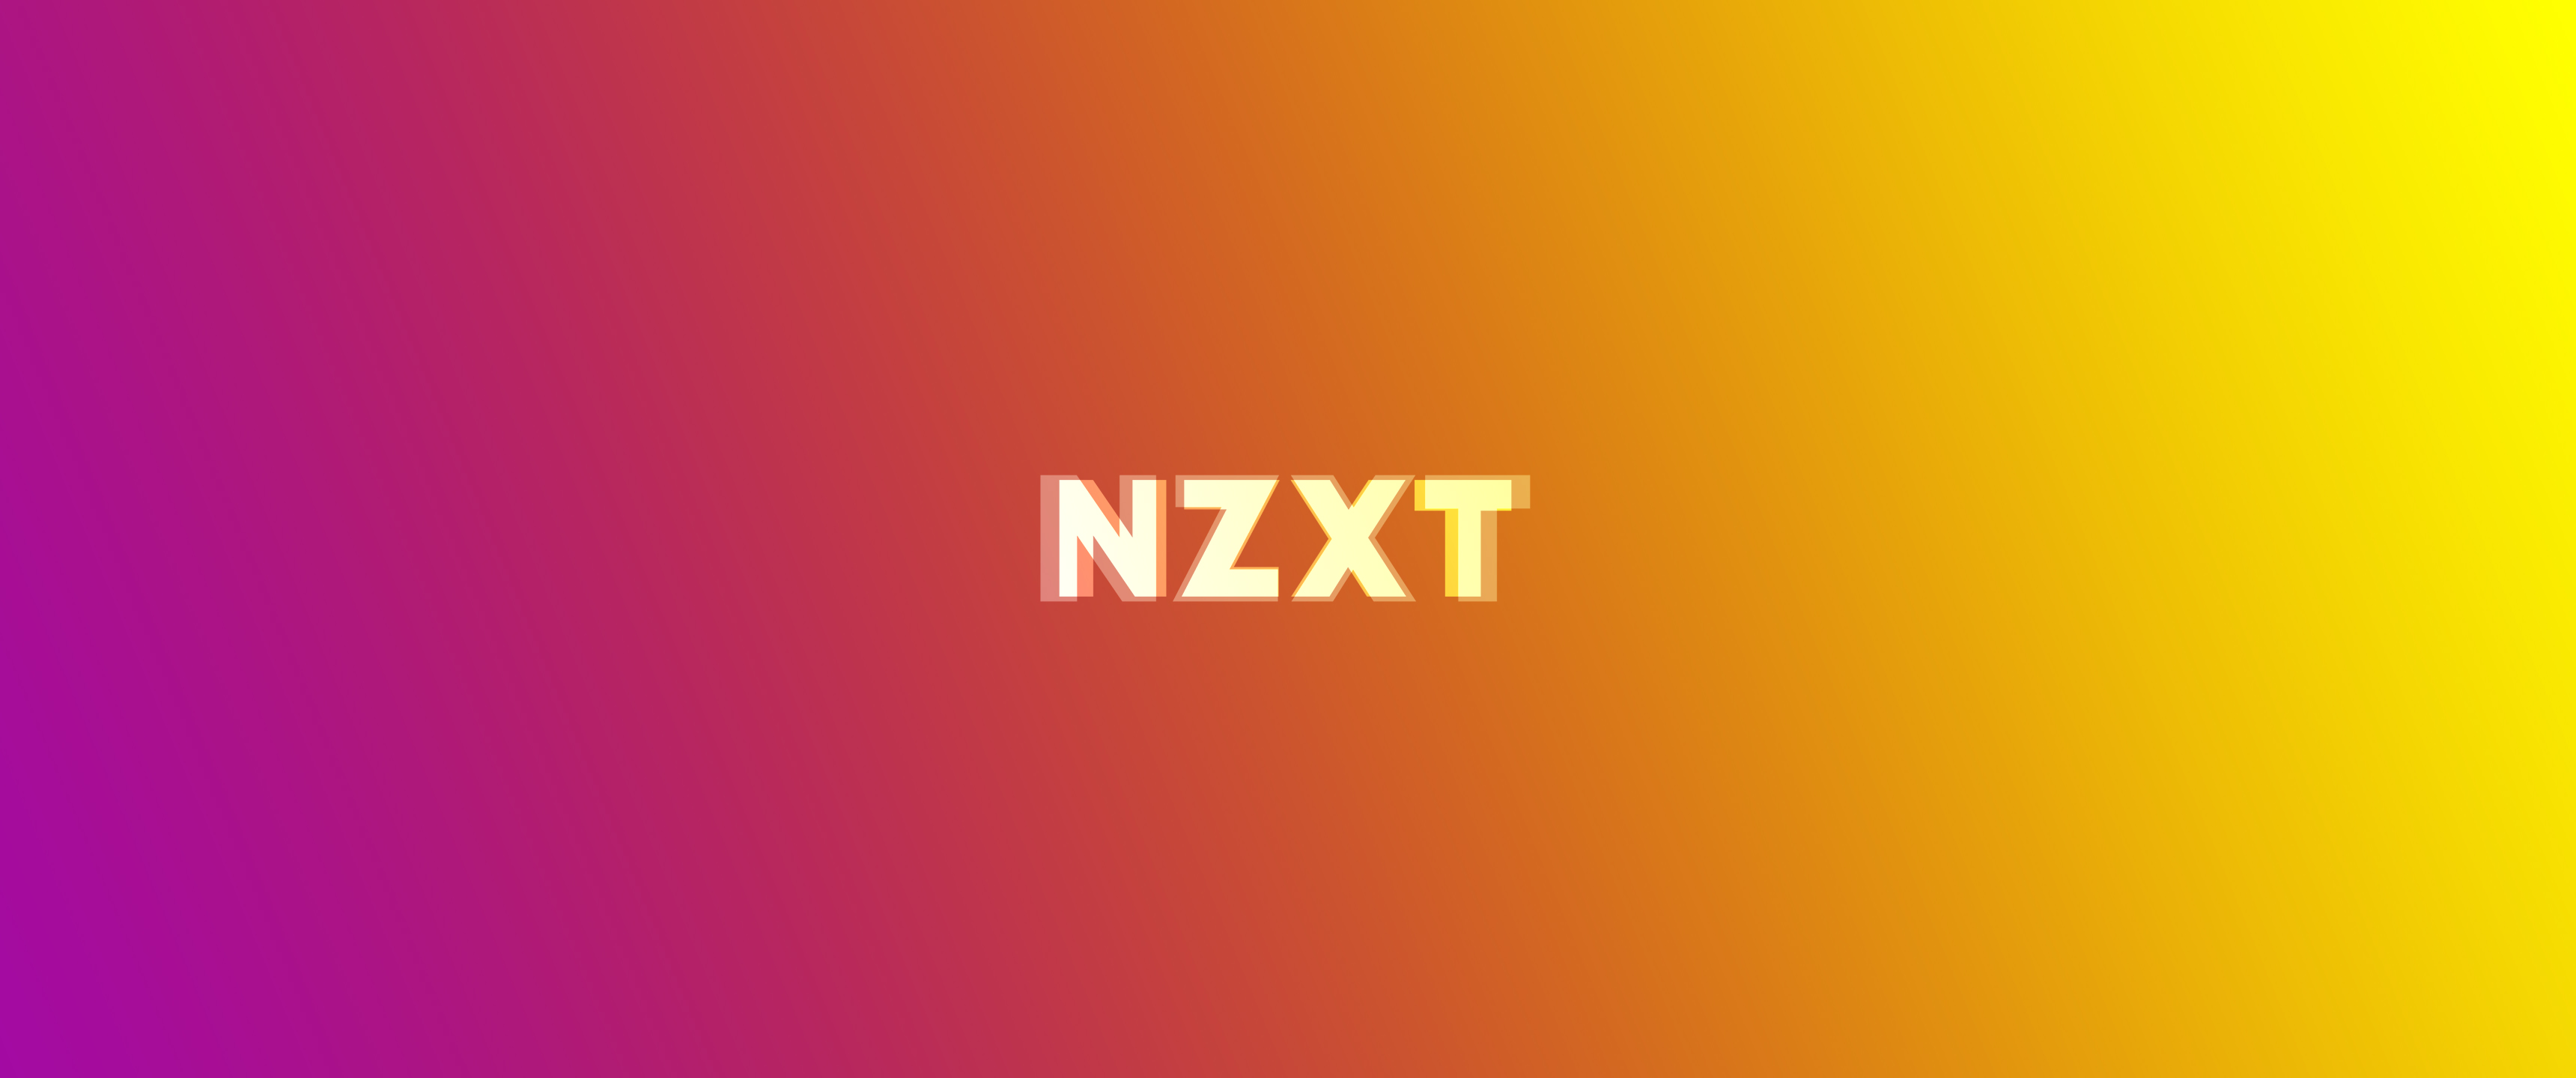 Nzxt Wallpapers